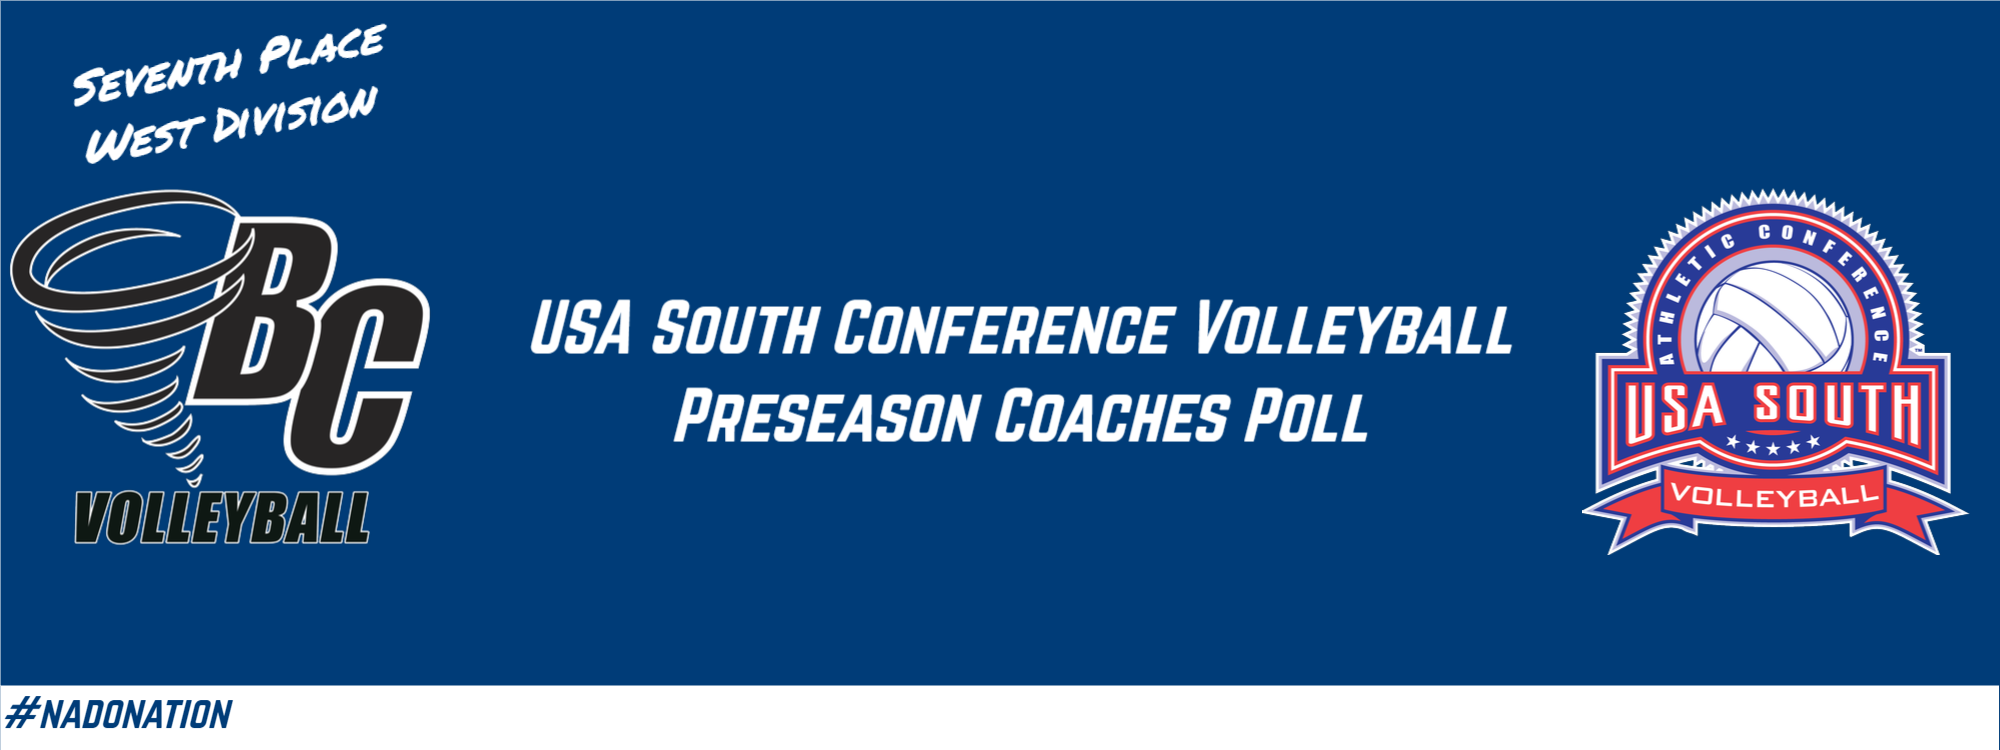 Volleyball Ranked Seventh in Divisional Coaches Poll